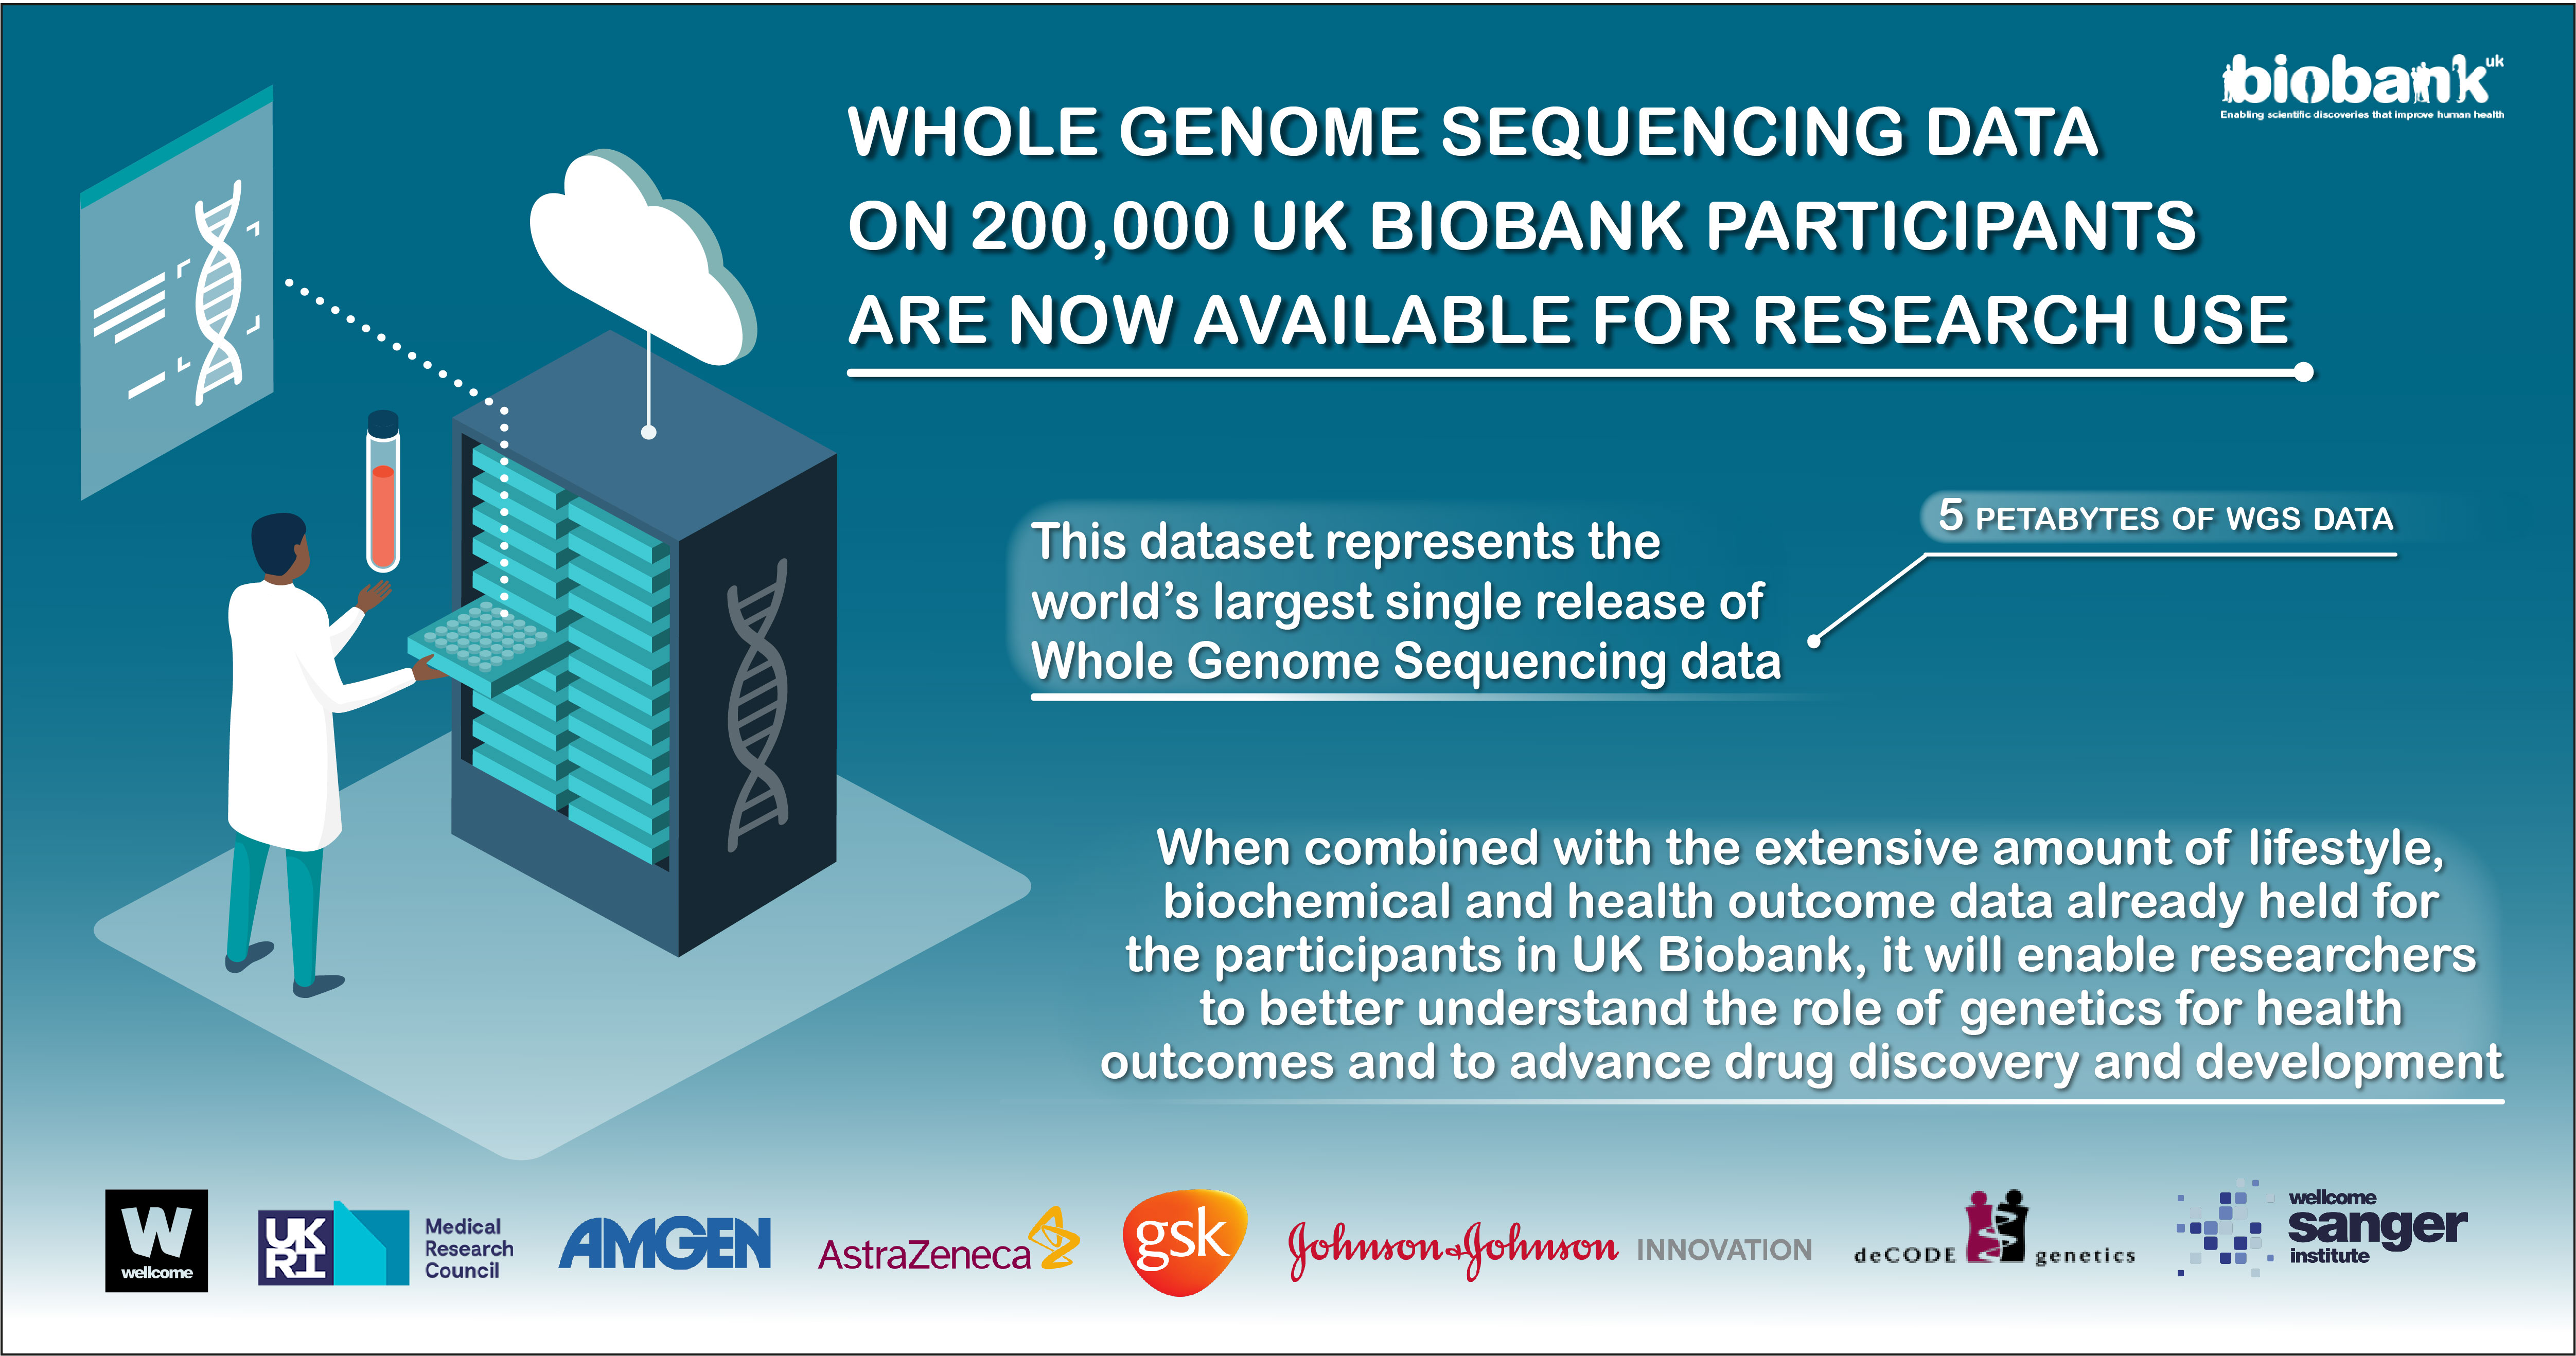 Whole Genome Sequencing data on 200,000 UK Biobank participants available now